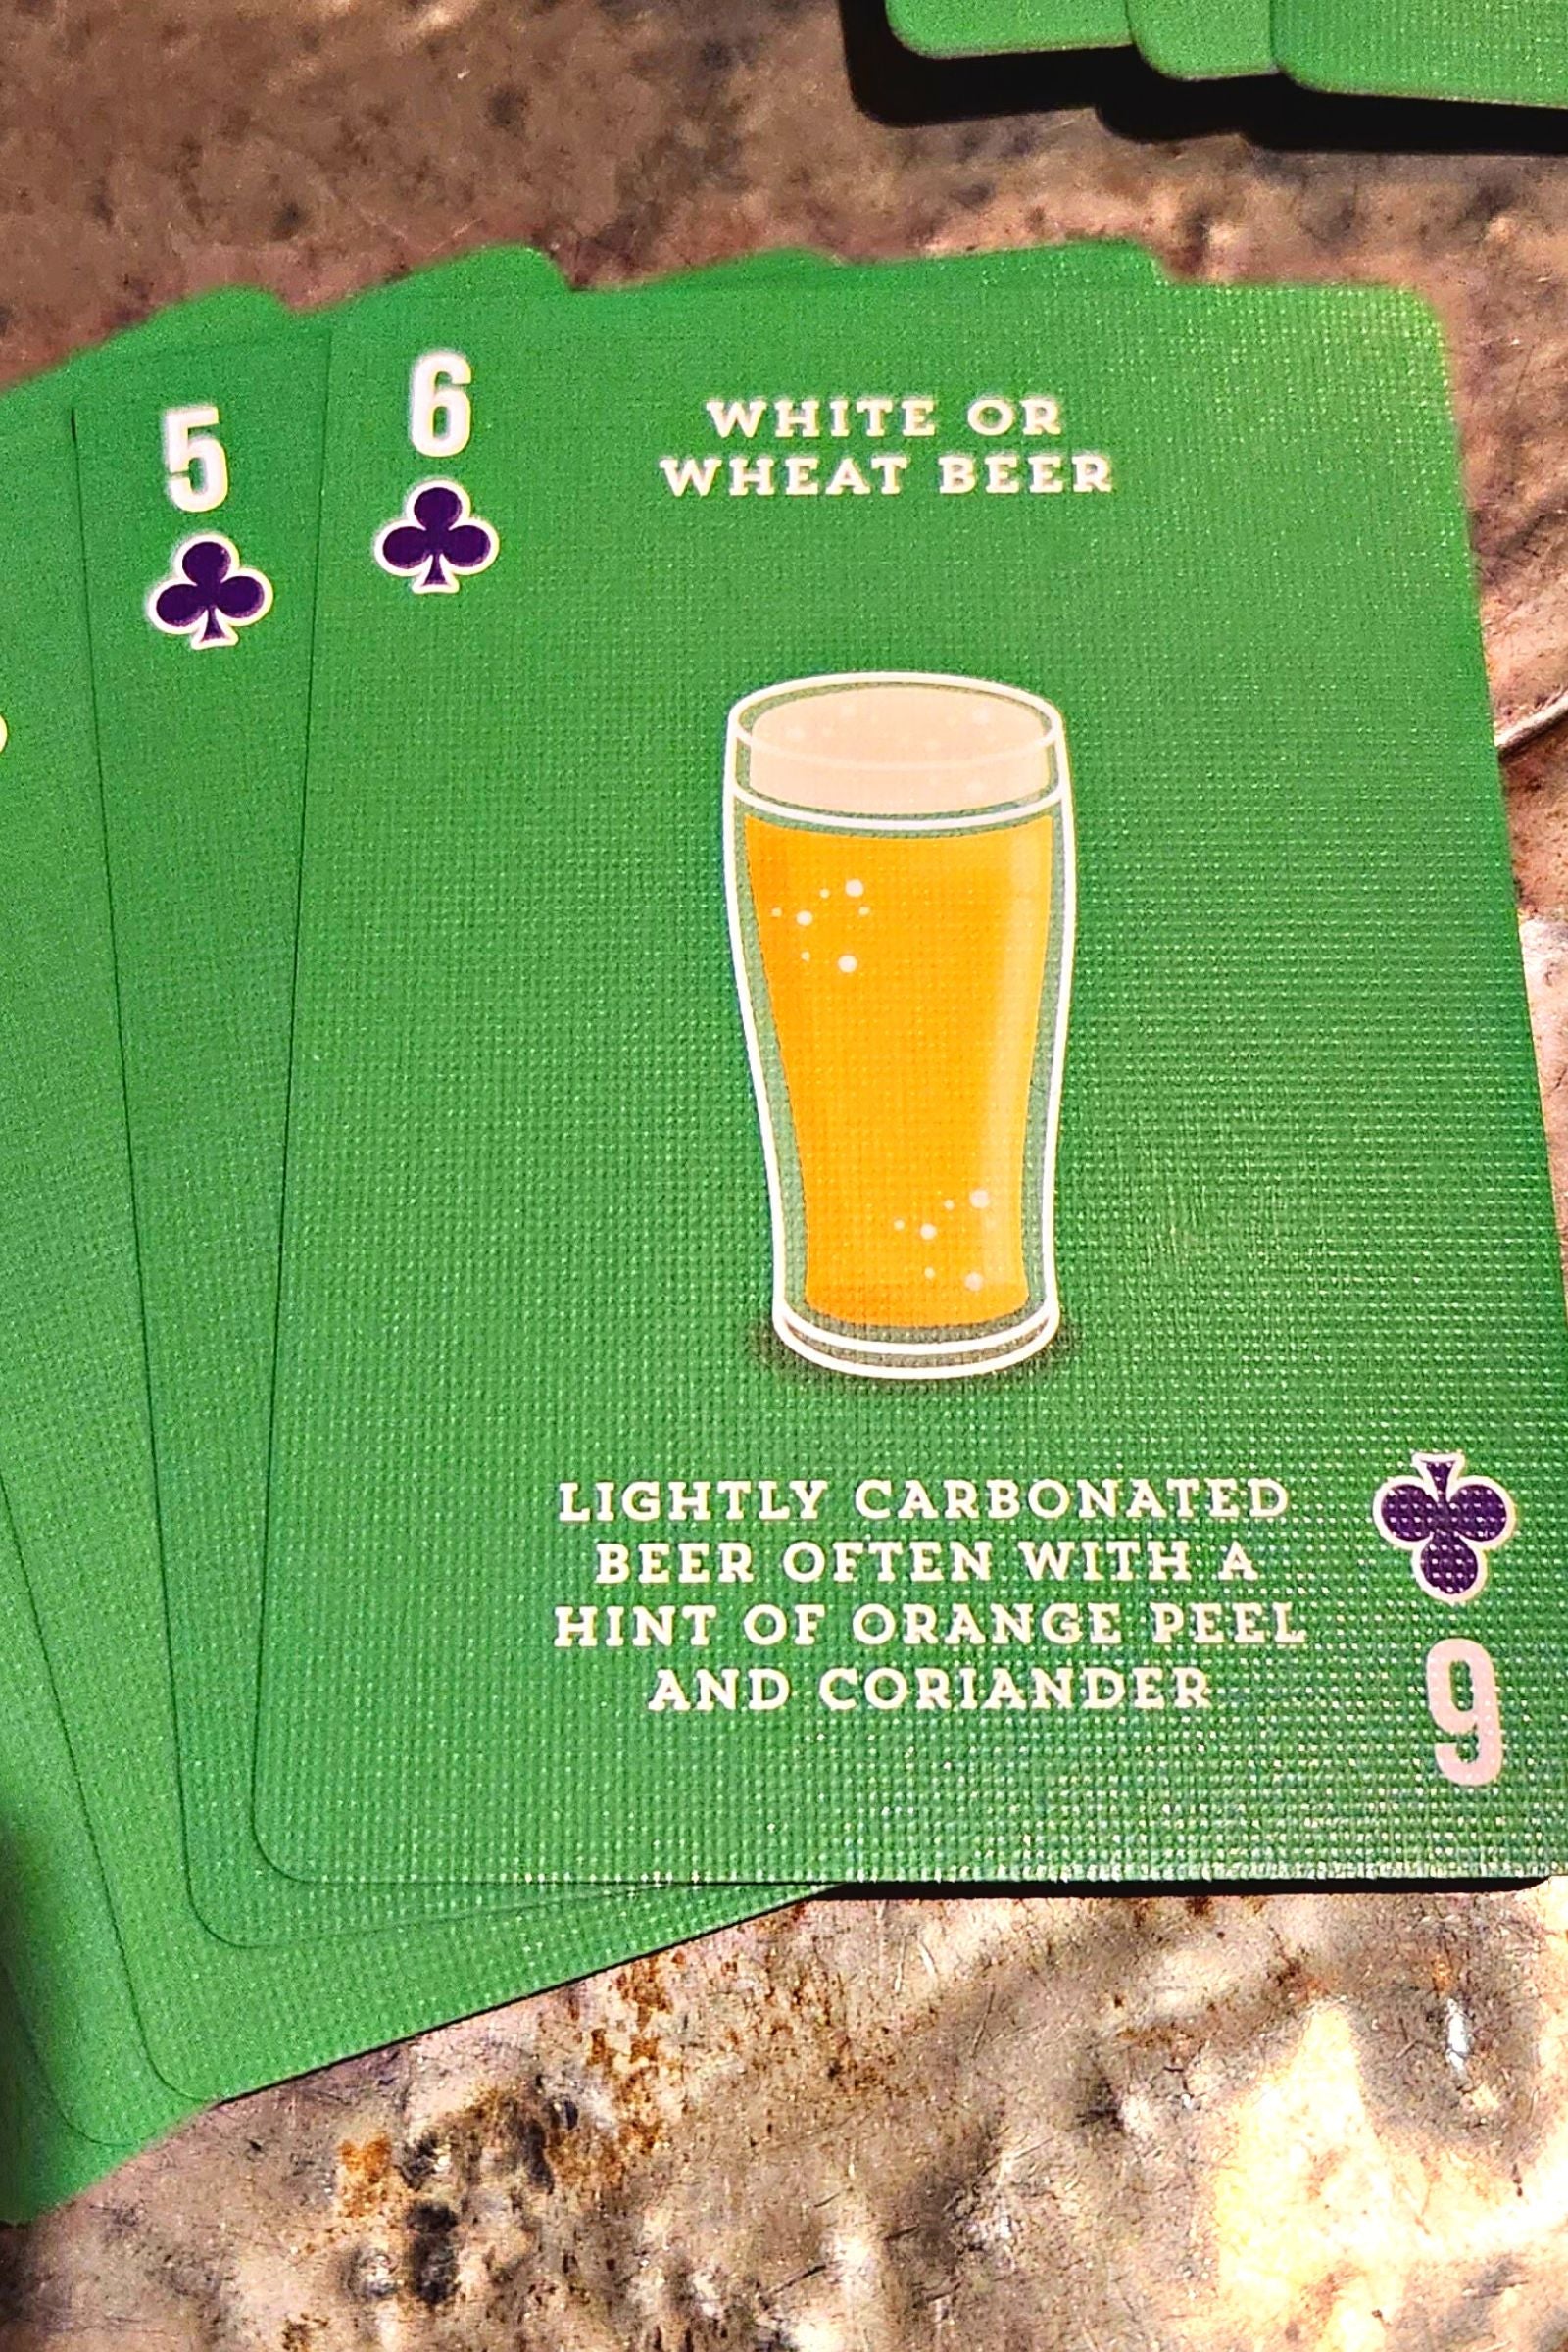 Beer Lover's Playing Cards